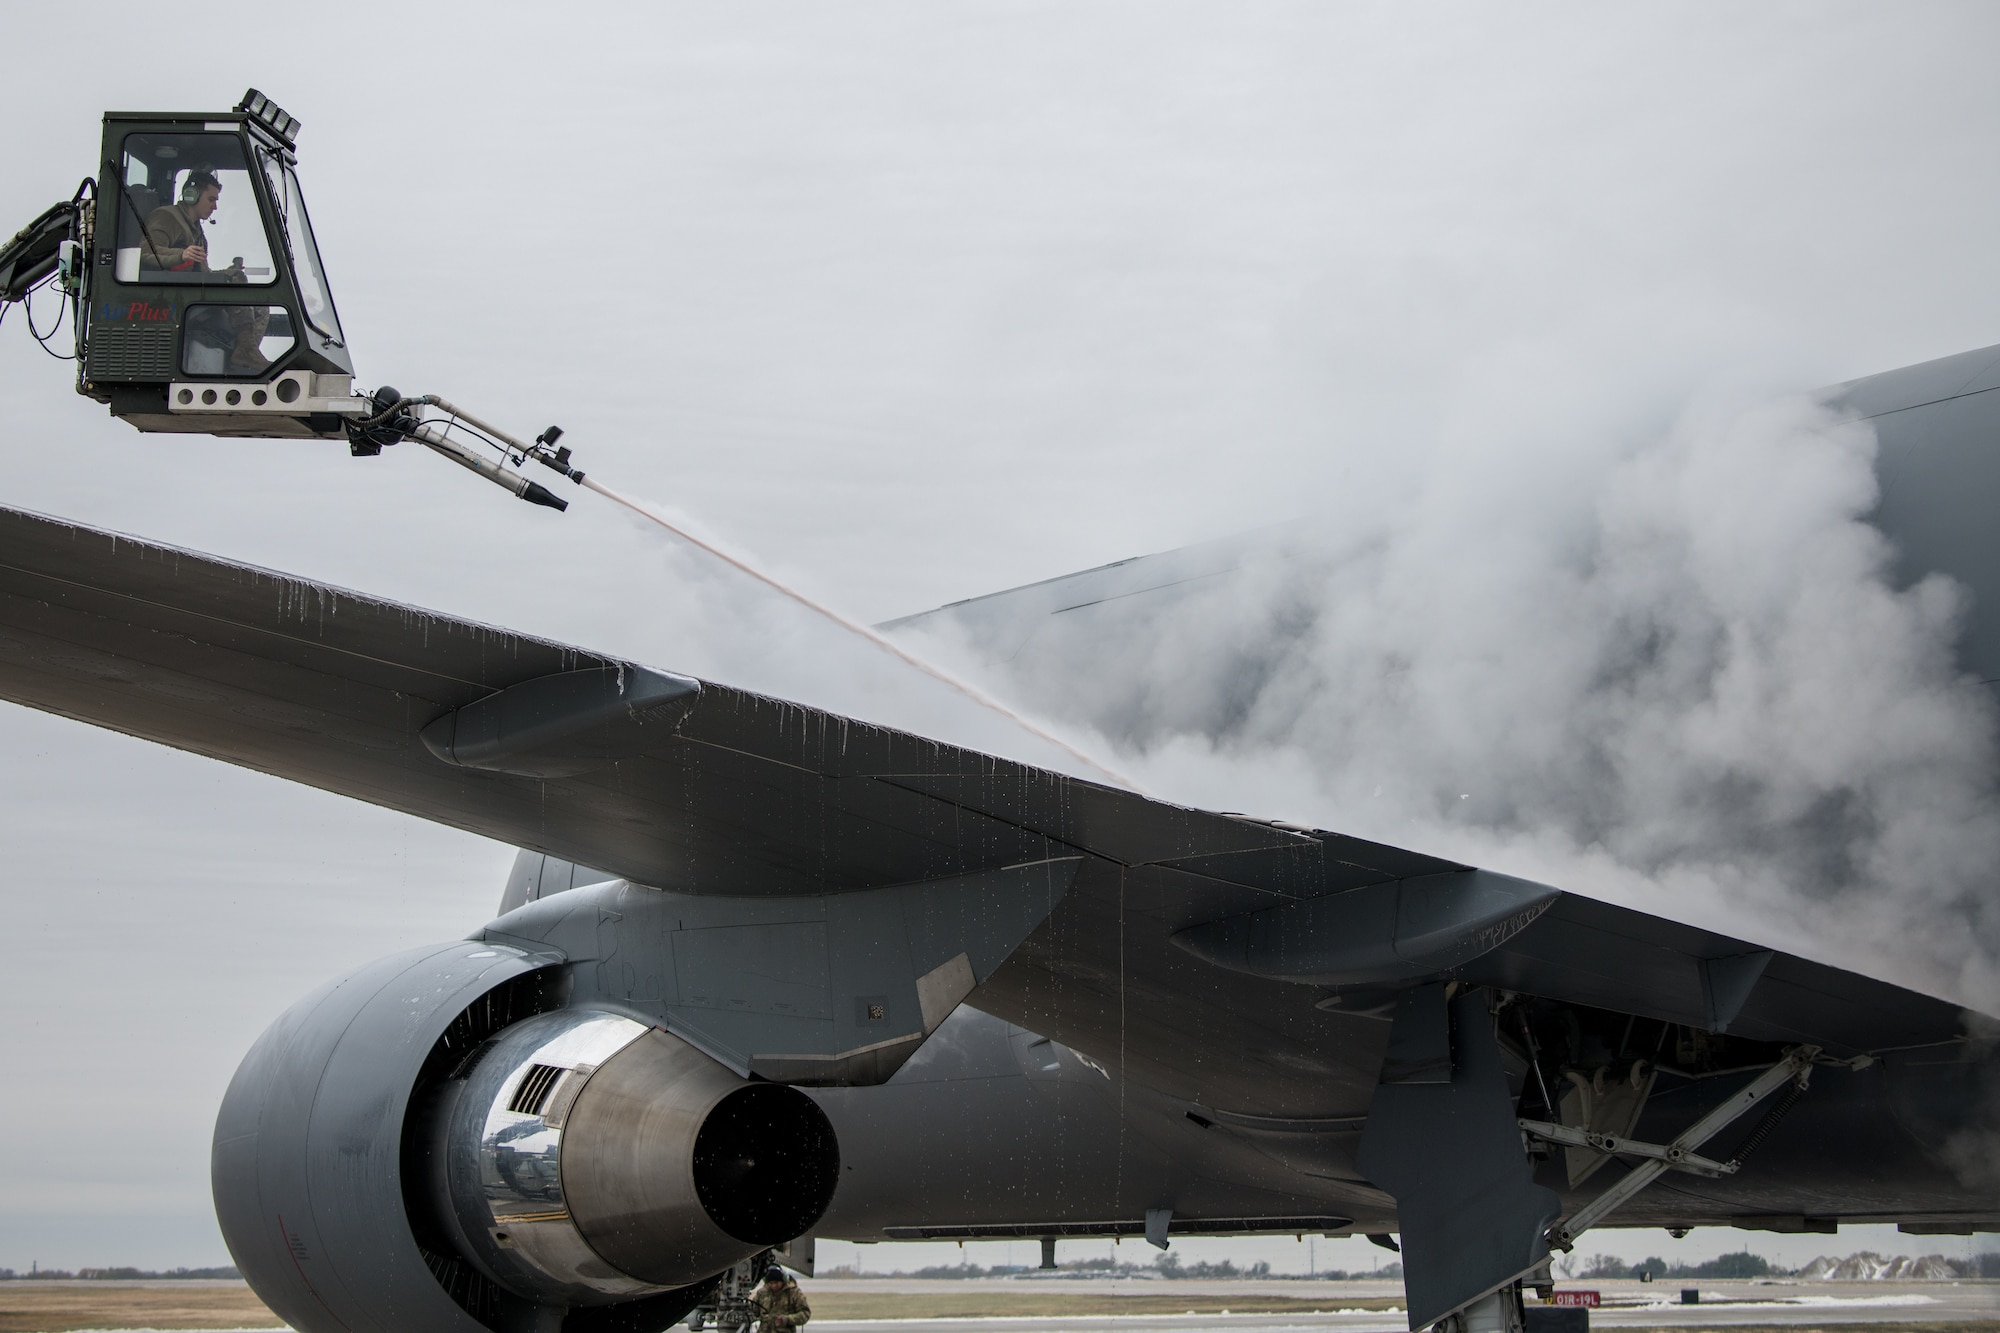 Senior Airman Thomas Hawkins, 22nd Maintenance Squadron aerospace propulsion journeyman, sprays the wing of a KC-46A Pegasus from a Global GL1800 de-ice basket Oct. 28, 2020, at McConnell Air Force Base, Kansas.